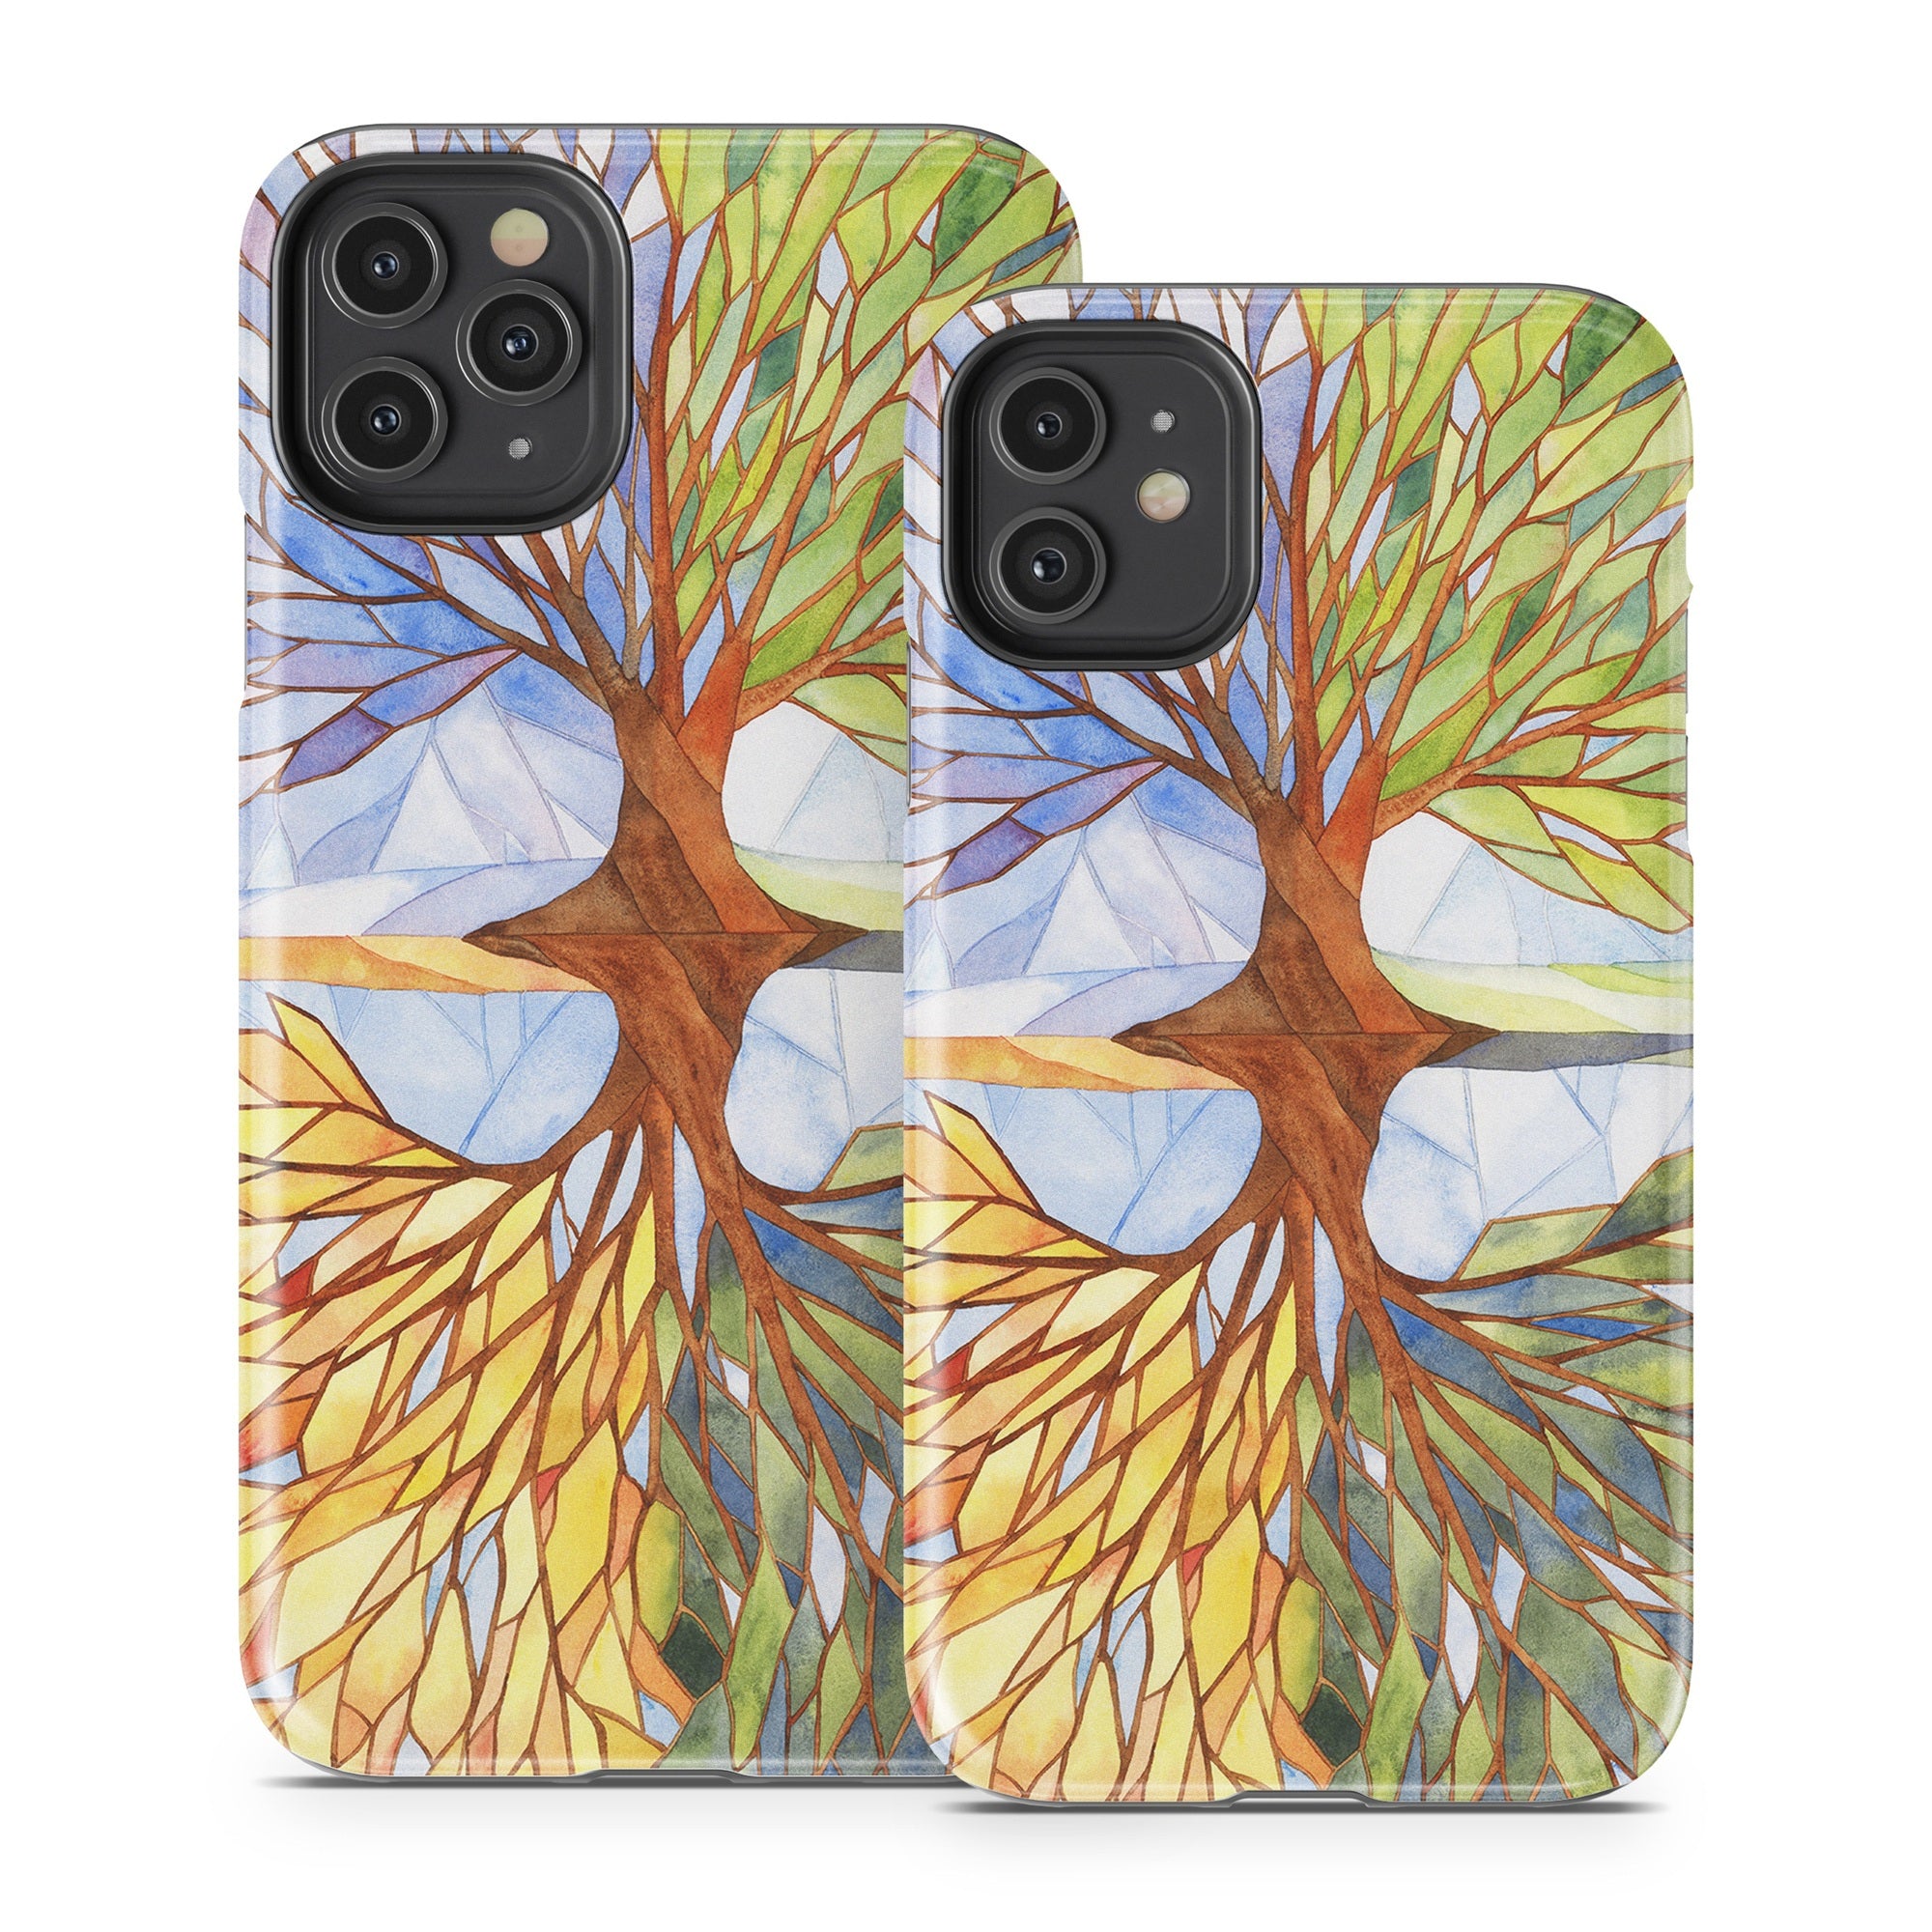 Searching for the Season - Apple iPhone 11 Tough Case